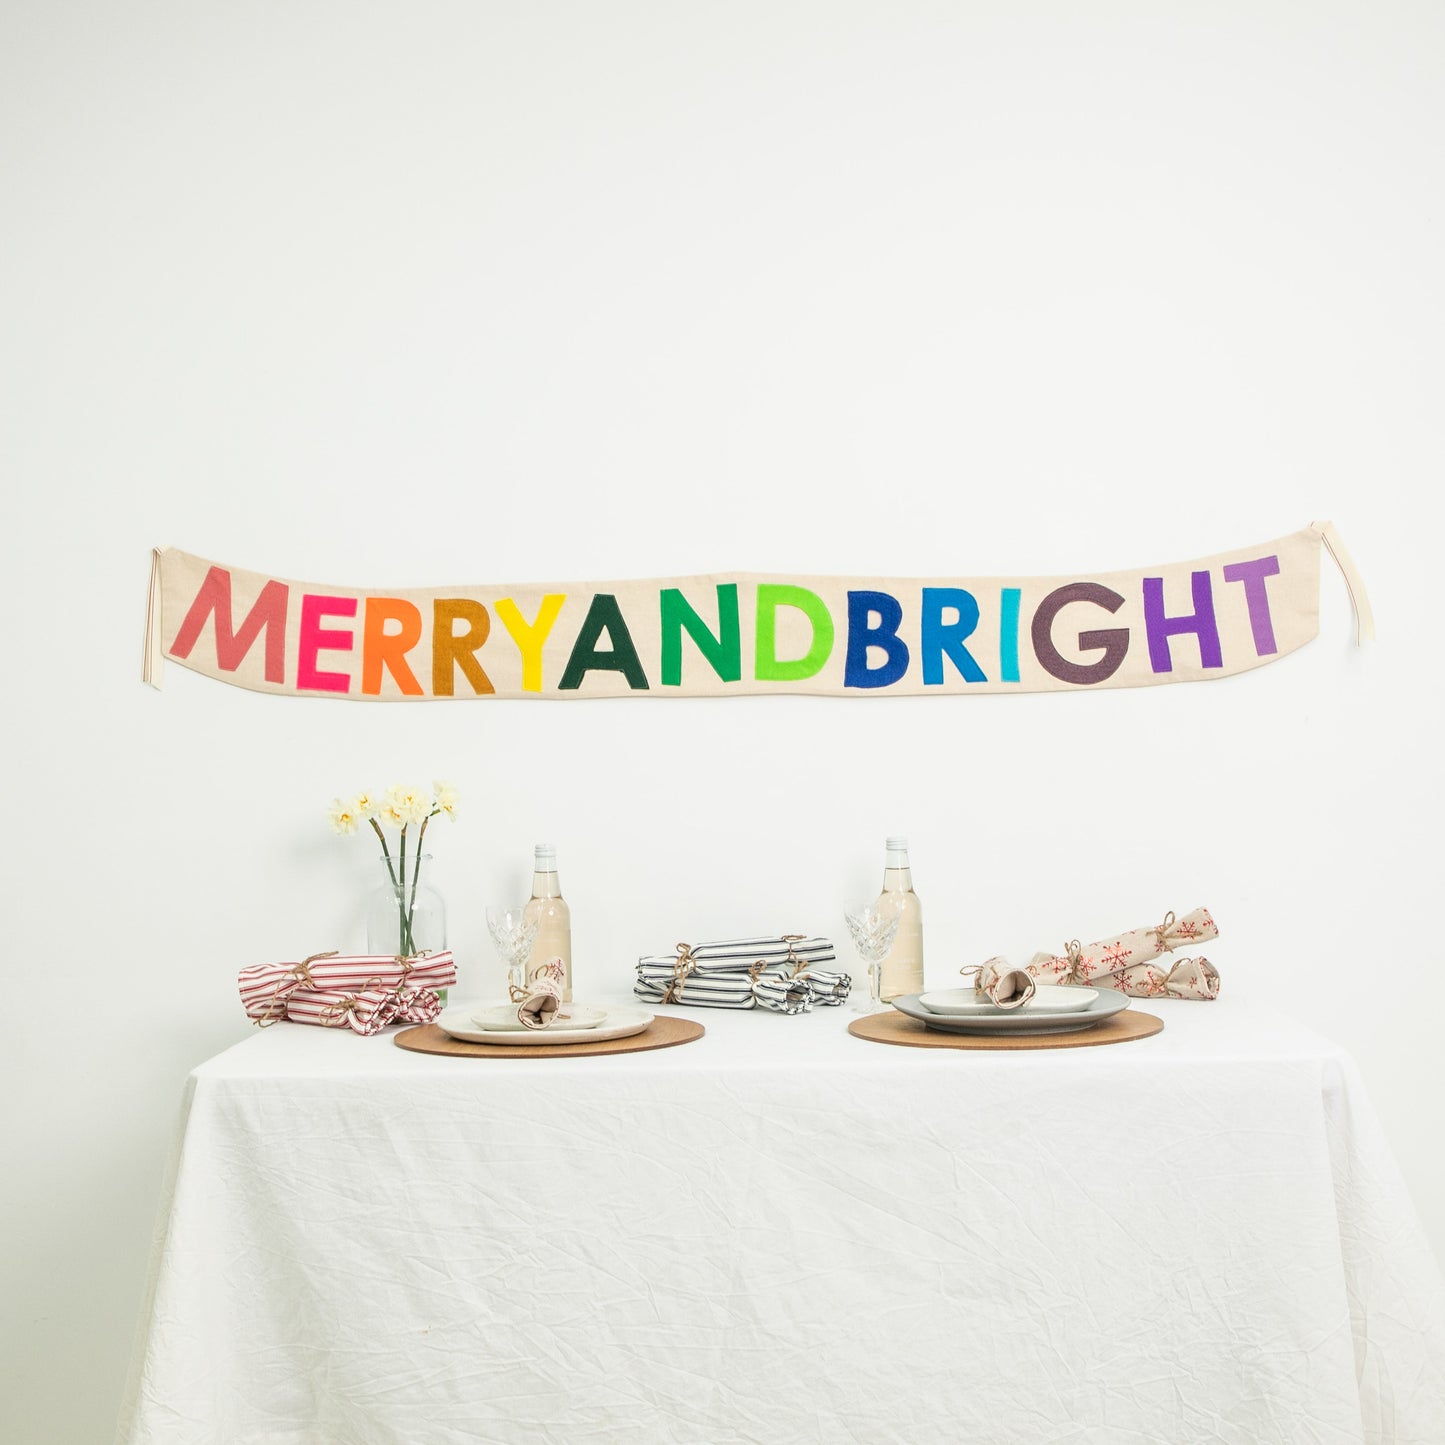 Felt Letter Banner - Merry and Bright hanging over table